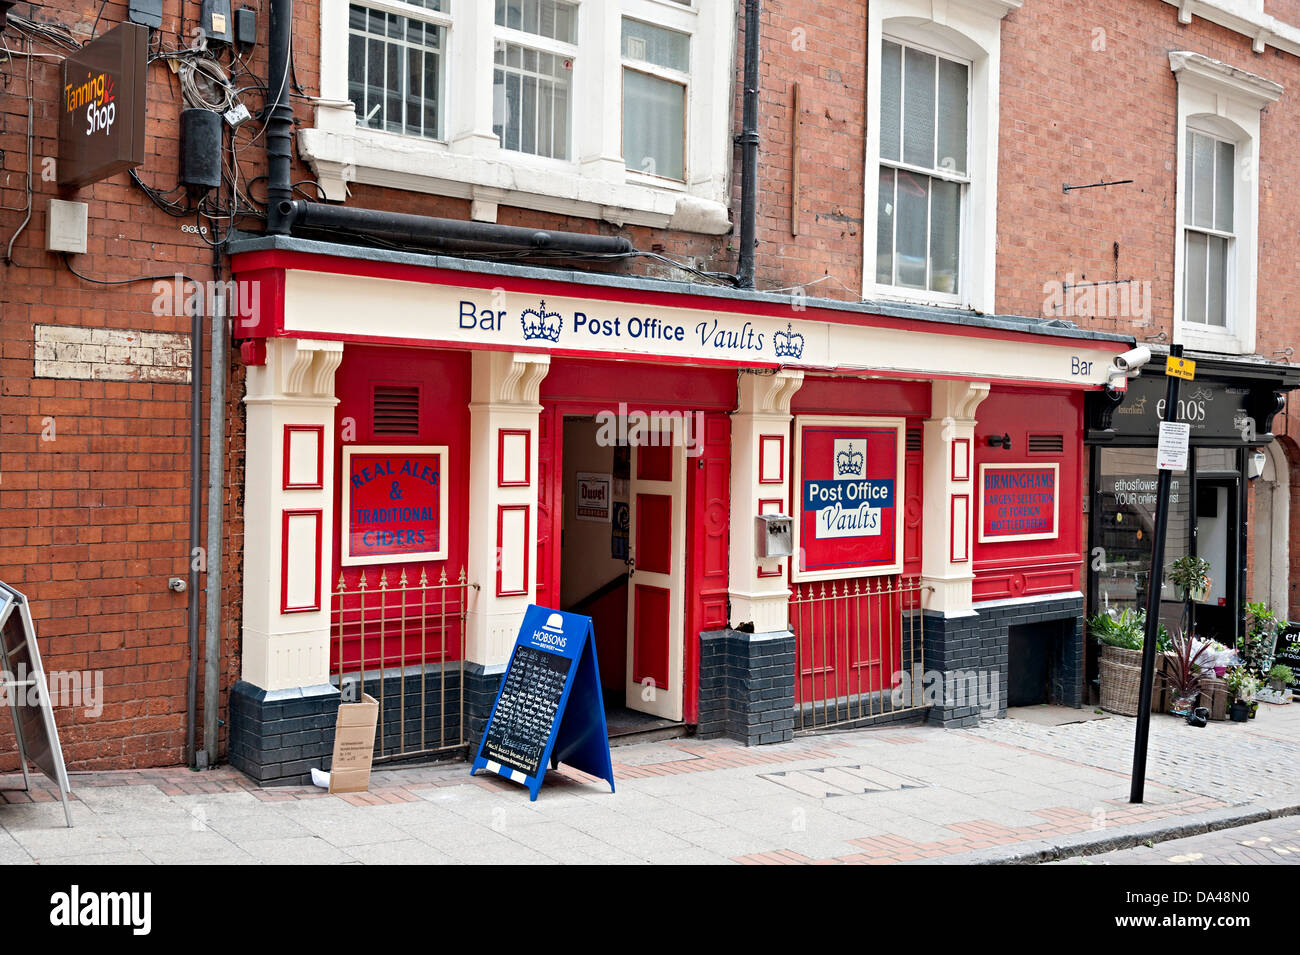 The post office vaults bar birmingham real ale and foreign beer pub new street Stock Photo